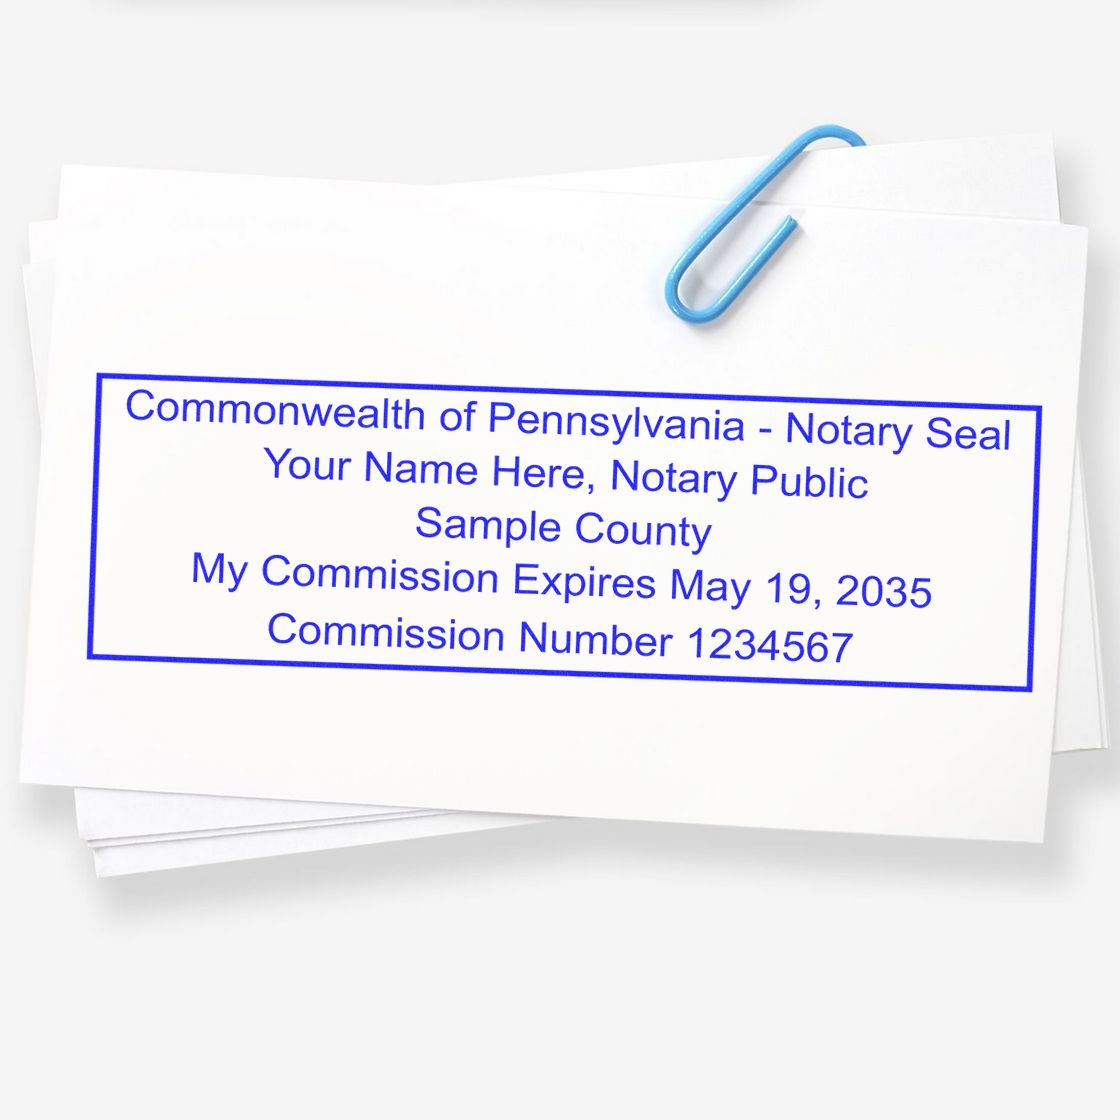 This paper is stamped with a sample imprint of the Wooden Handle Pennsylvania Rectangular Notary Public Stamp, signifying its quality and reliability.